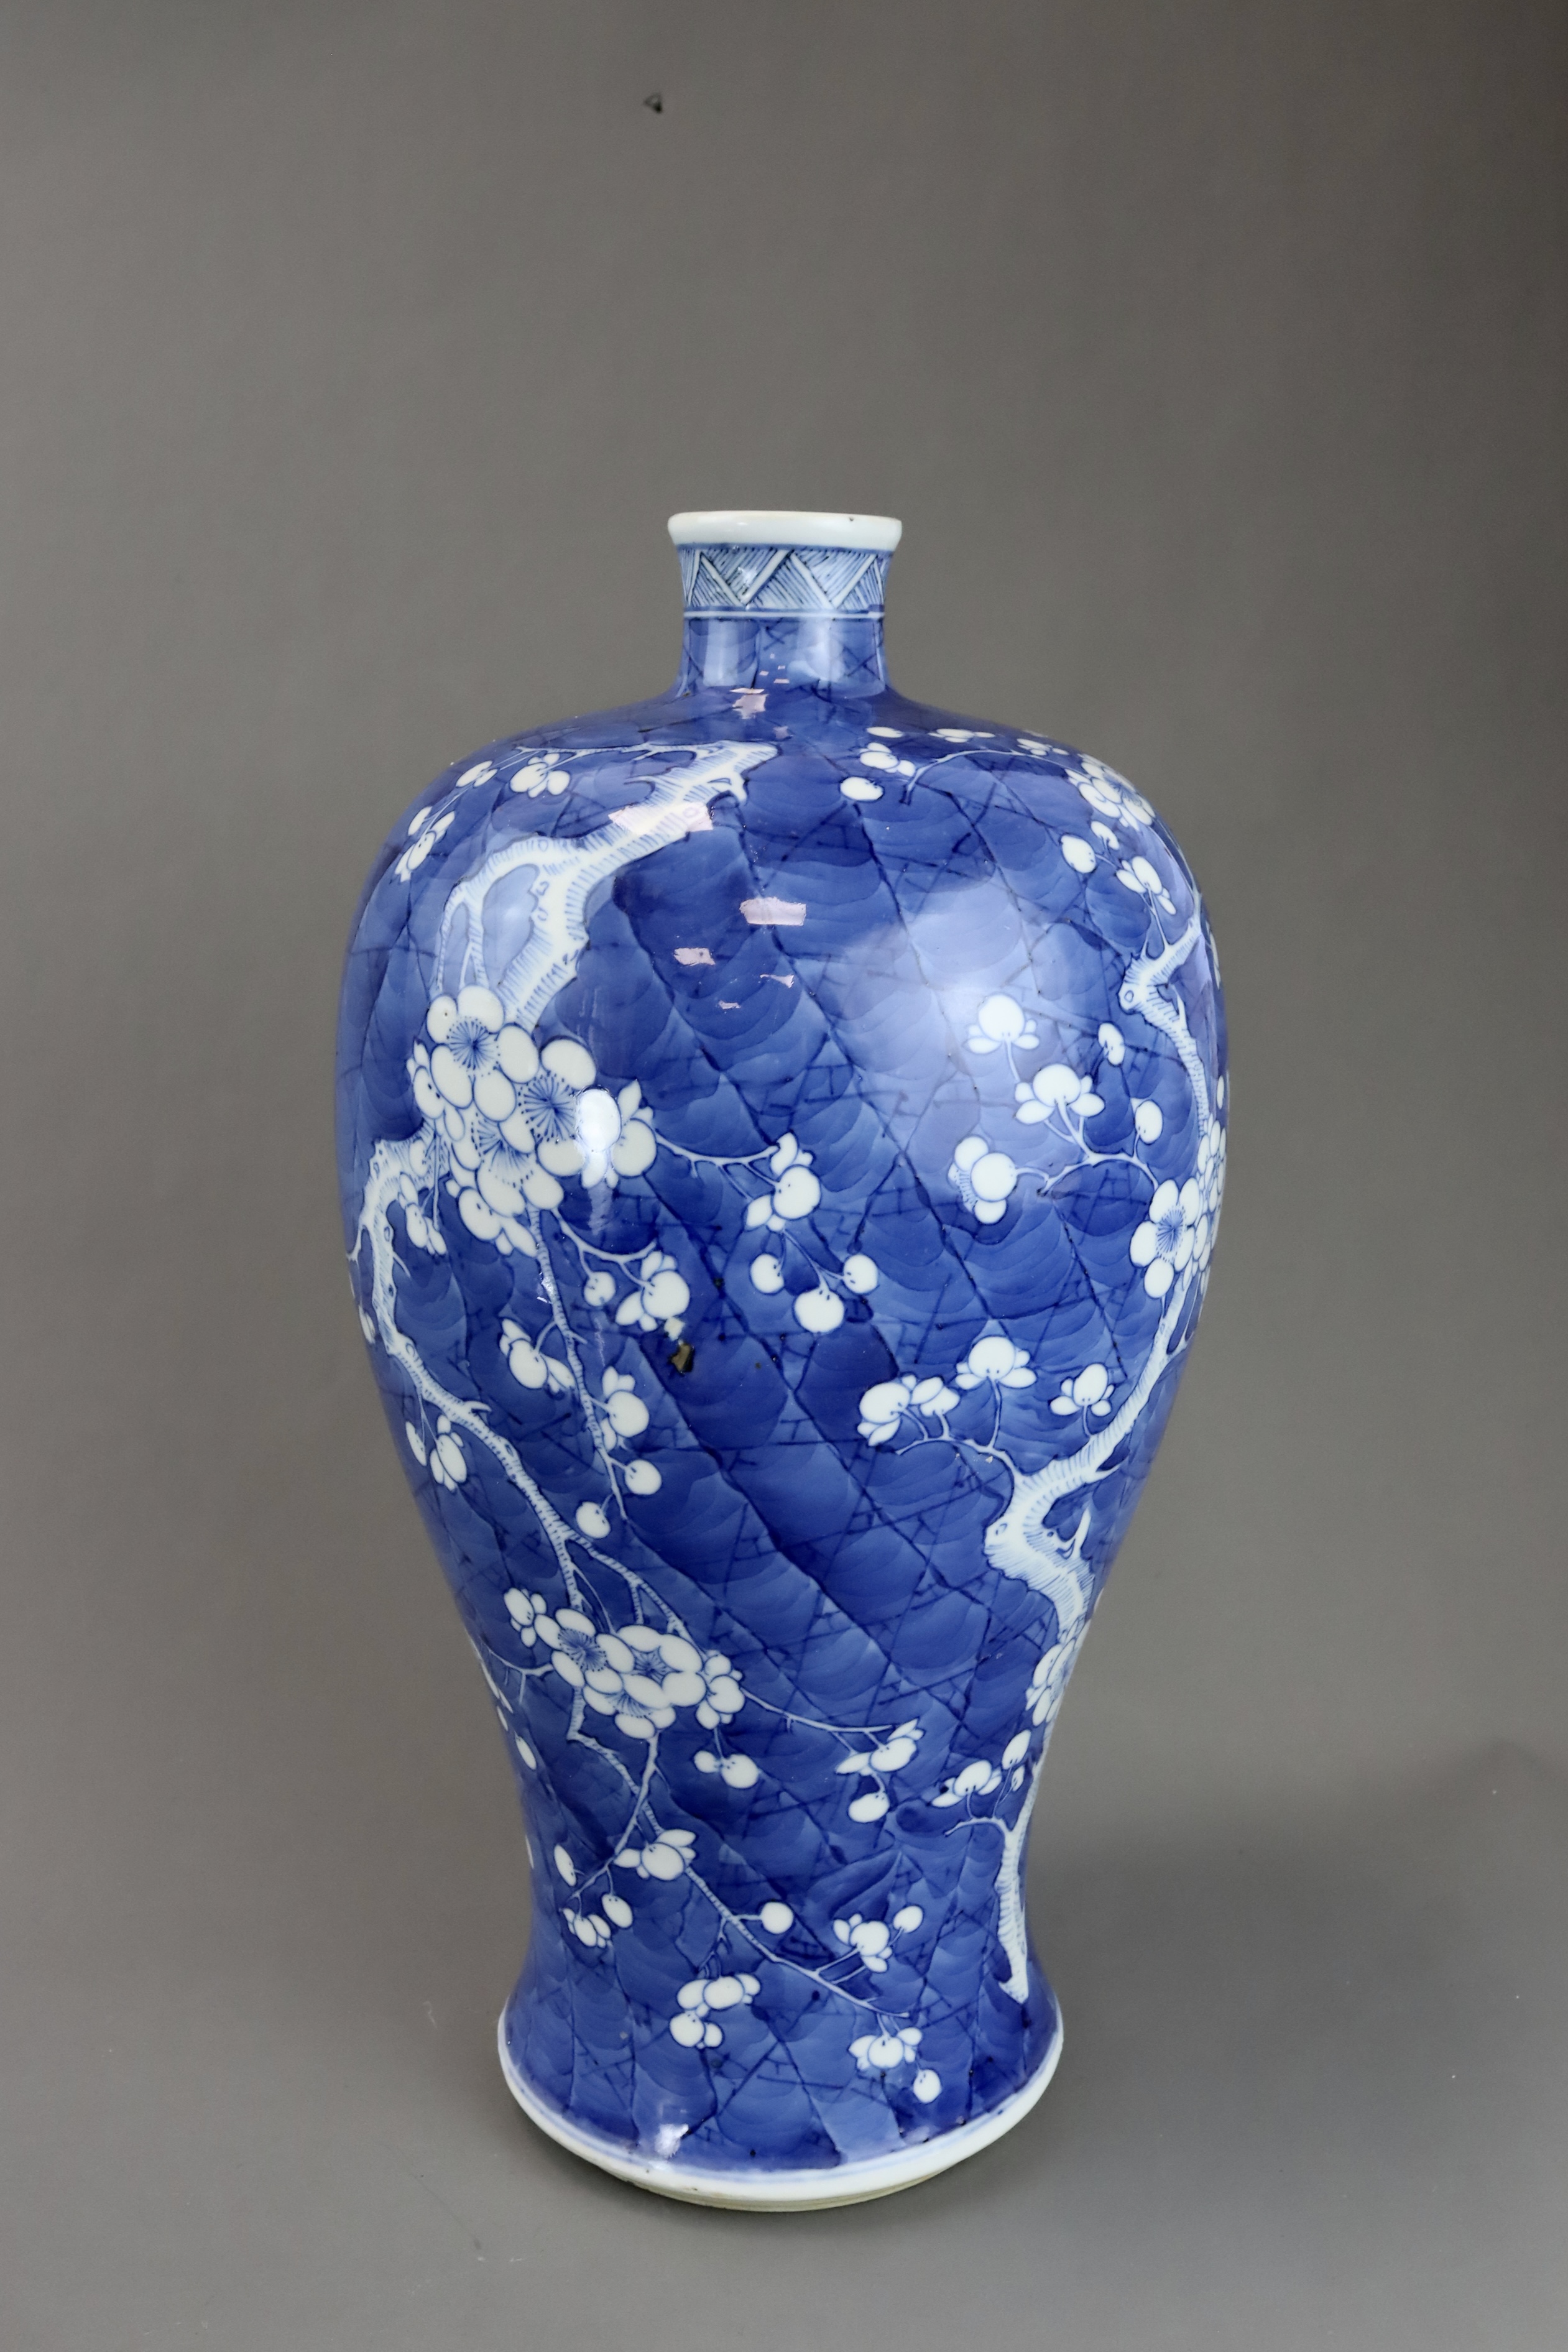 A Blue and White Vase with Prunus, 19th century - Image 4 of 7